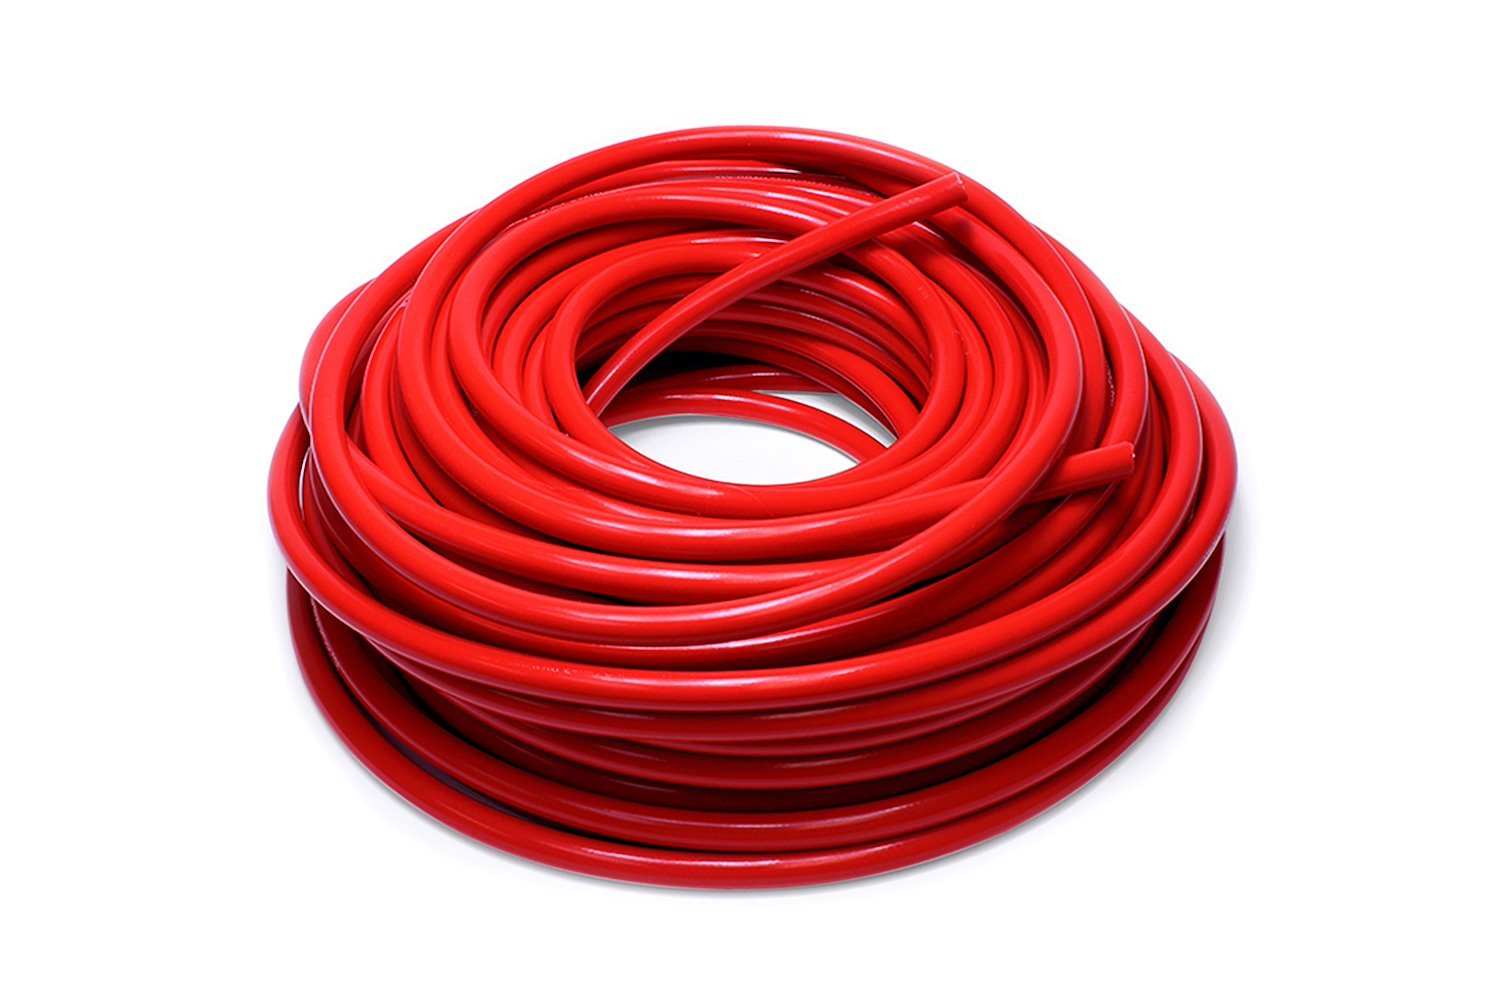 HTHH-050-REDx100 Silicone Heater Hose Tubing, High-Temp 1-Ply Reinforced, 1/2 in. ID, 100 ft. Roll, Red